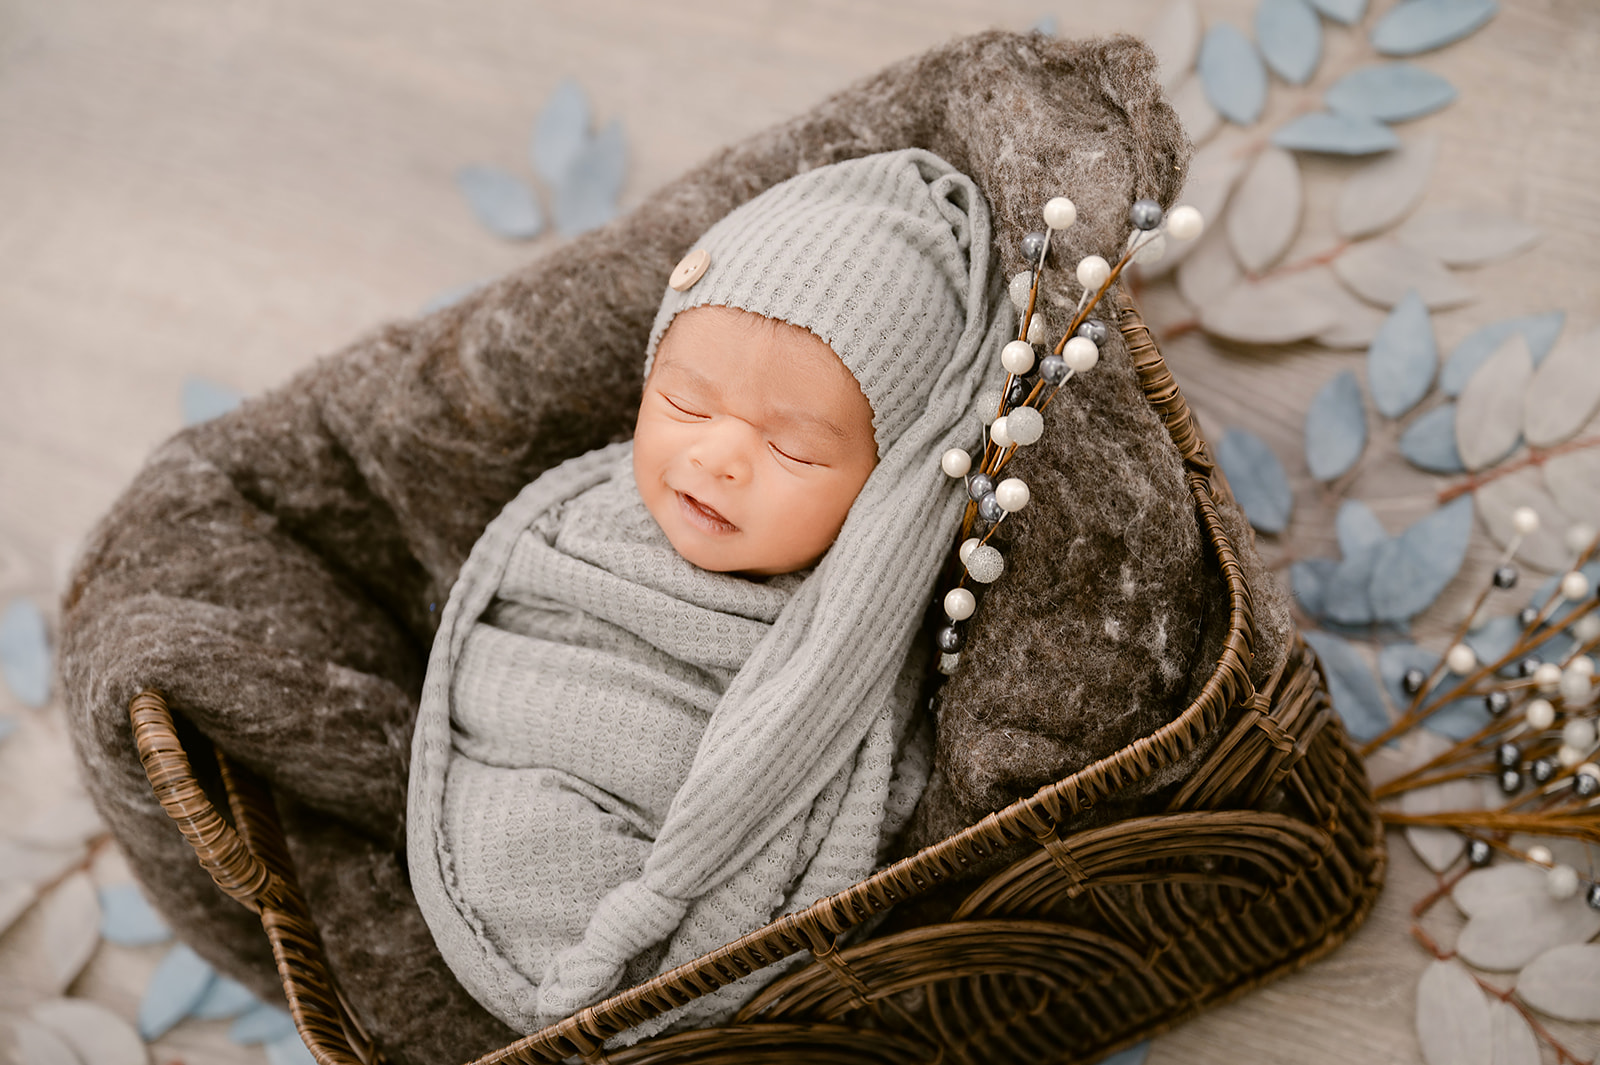 | Princeton MN Newborn Photography Studio | Safety Certified Newborn Photographer with 10 years experience